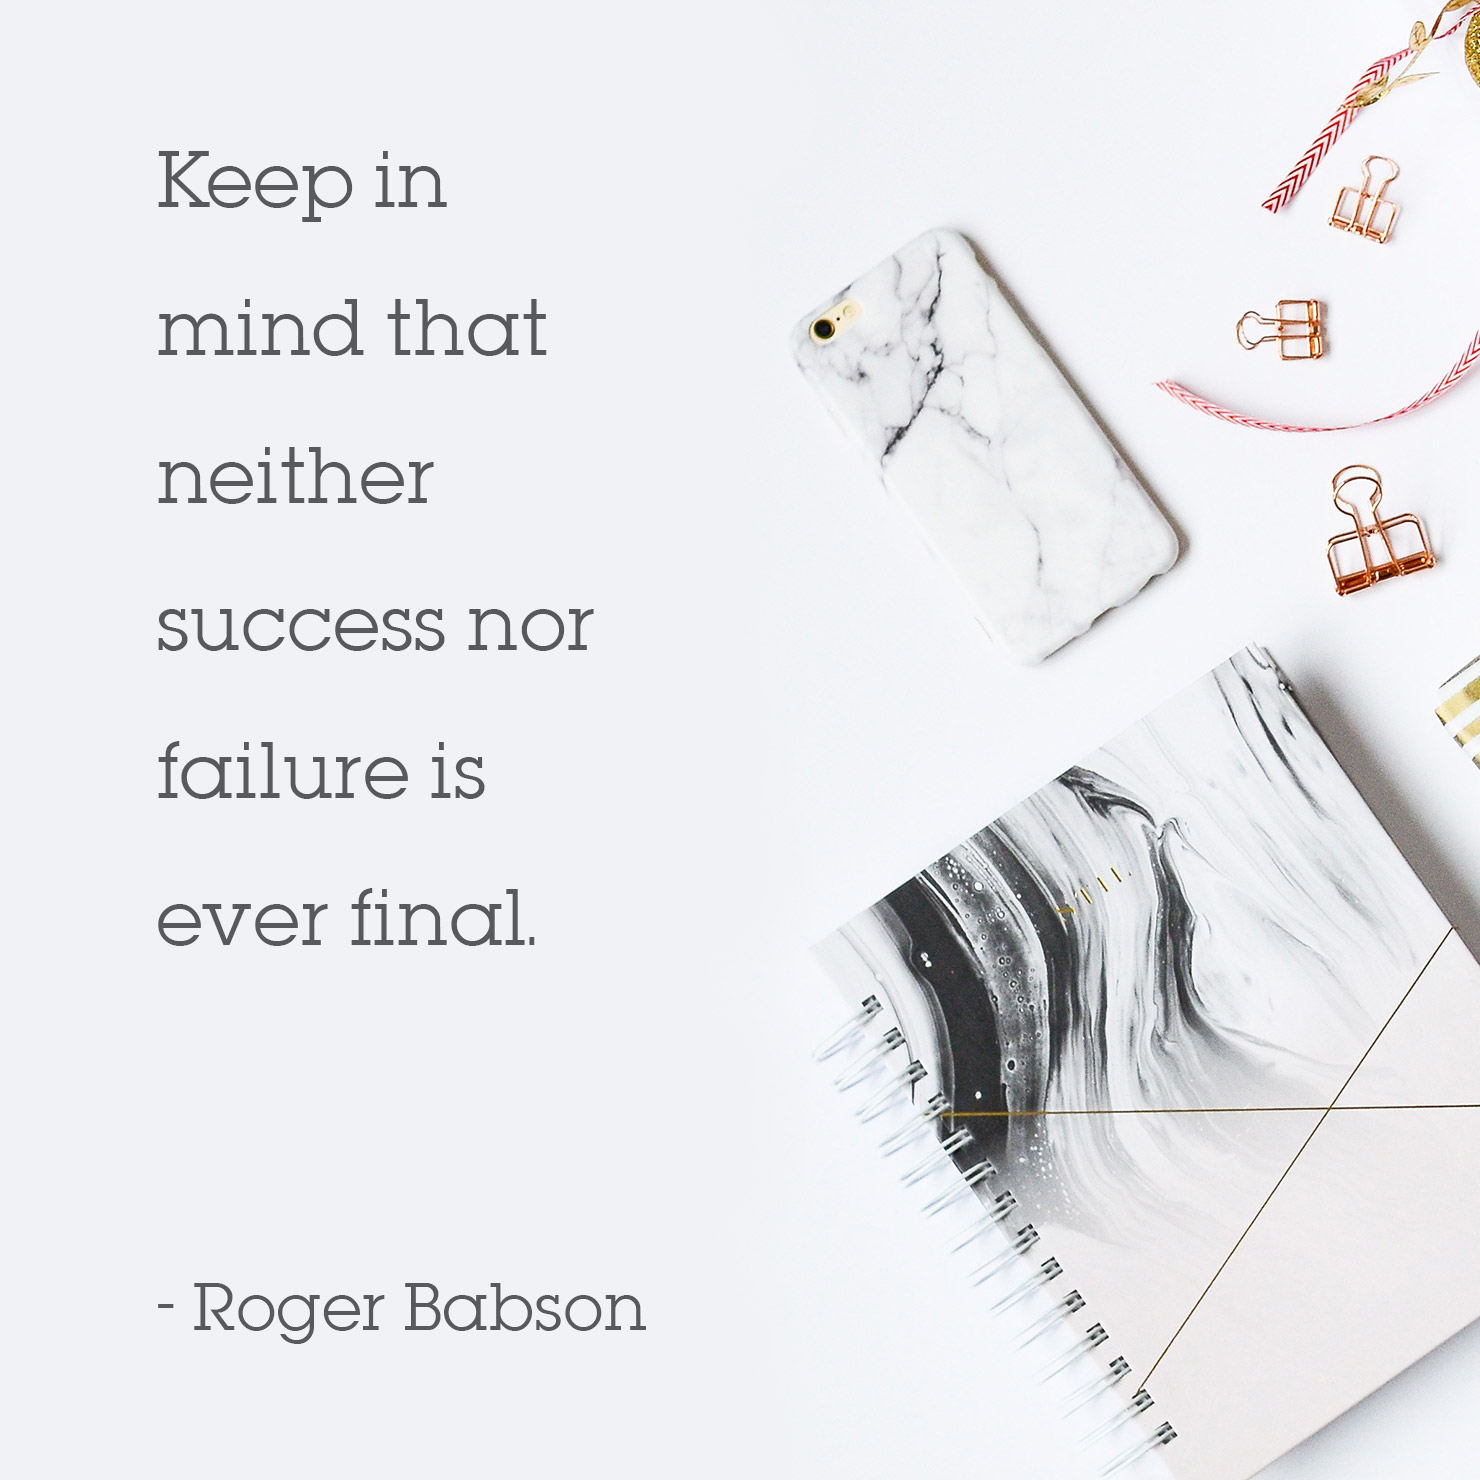 wisdom graduation quote: keep in mind that neither success nor failure is ever final - Roger Babson